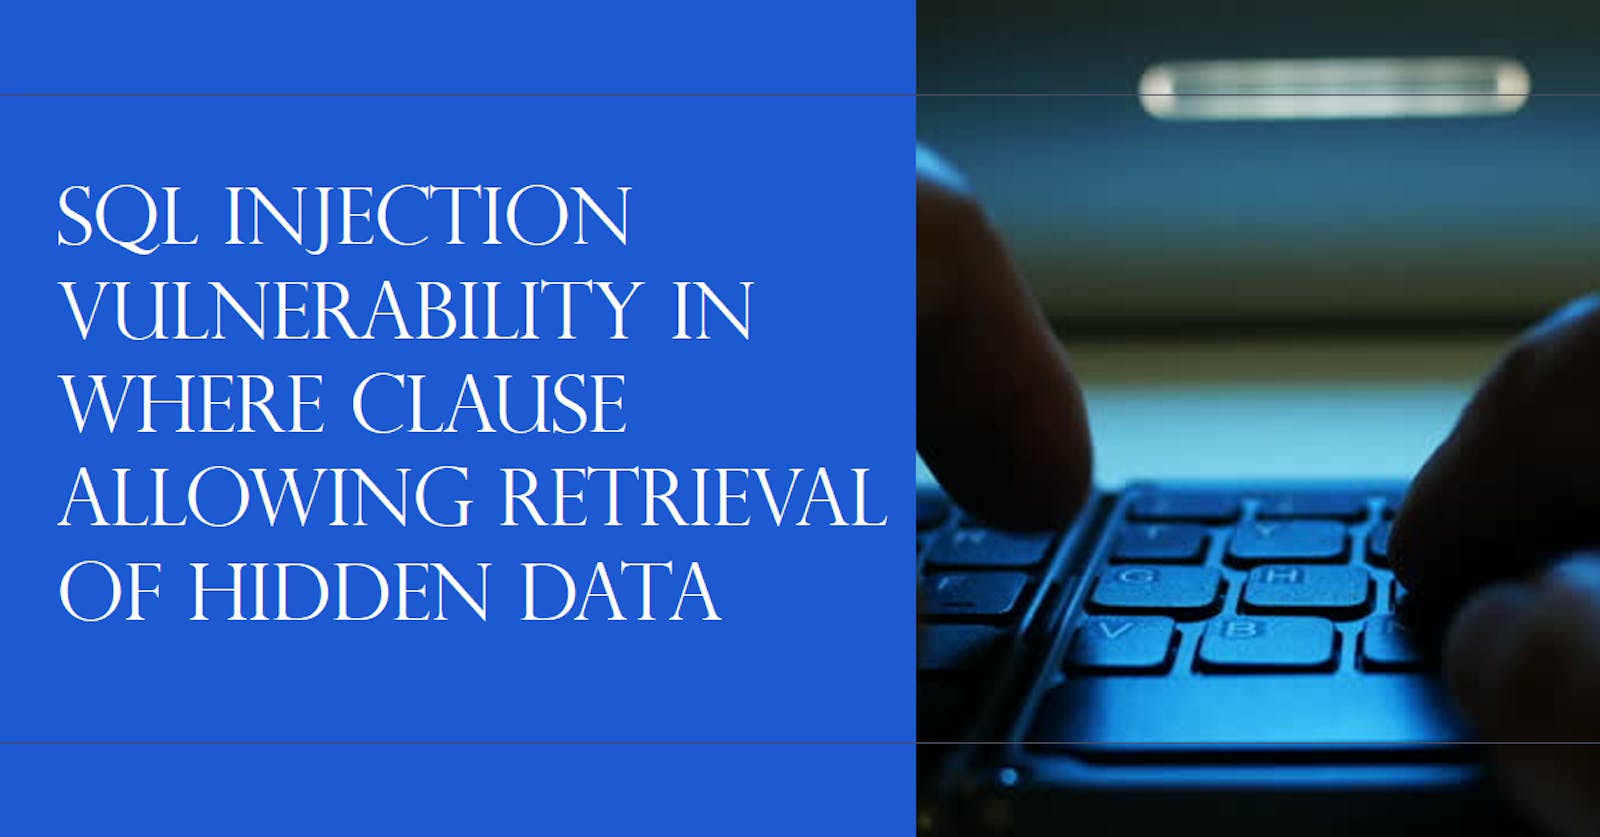 Lab: SQL injection vulnerability in WHERE clause allowing retrieval of hidden data